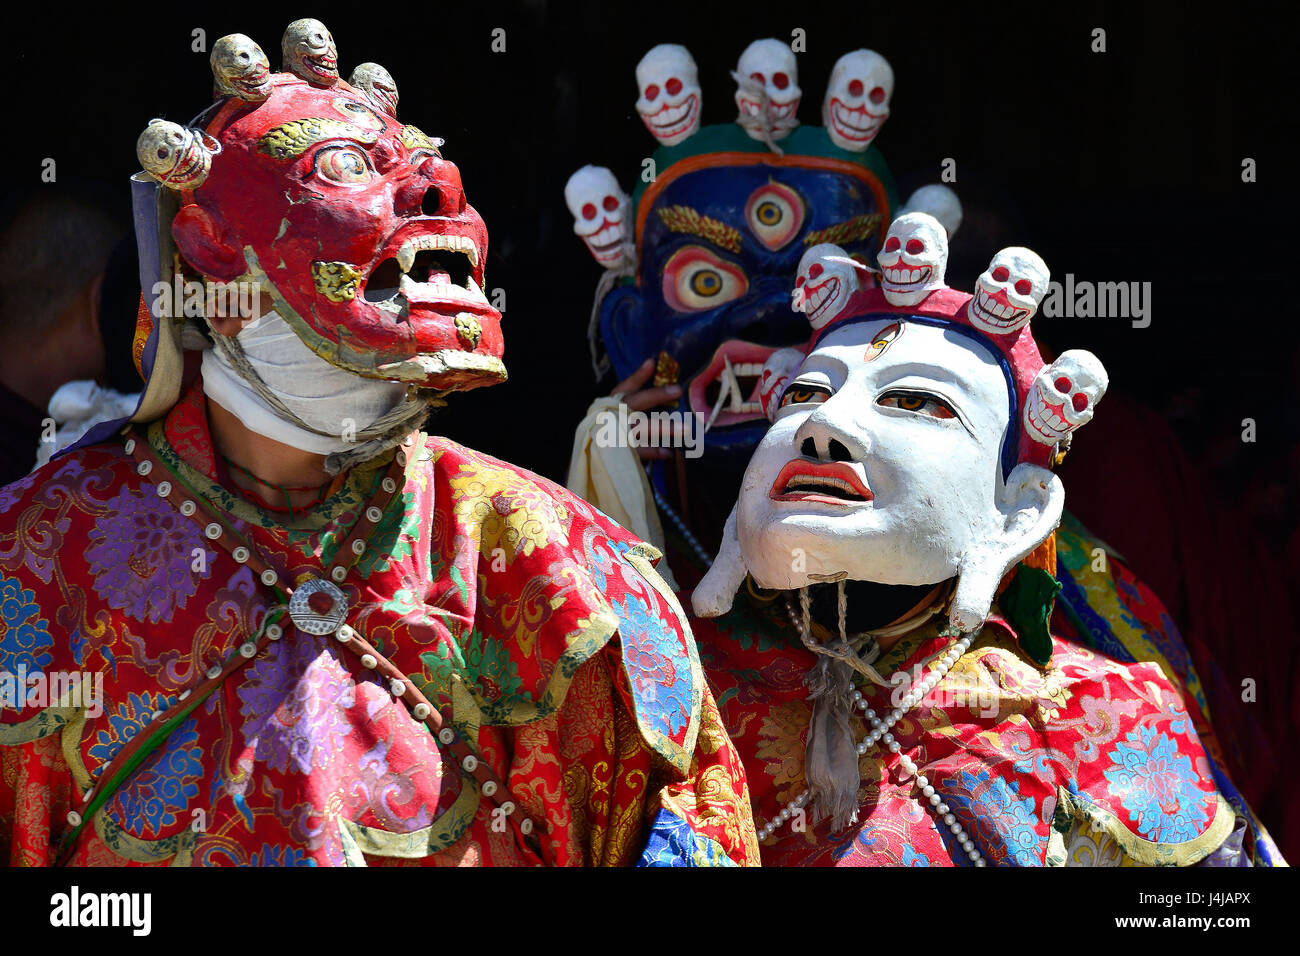 Buddhist mystery with the performance of Cham Dance in the Tibetan monastery in Zanskar: red, white and blue masks with skulls, bright red robes of mo Stock Photo